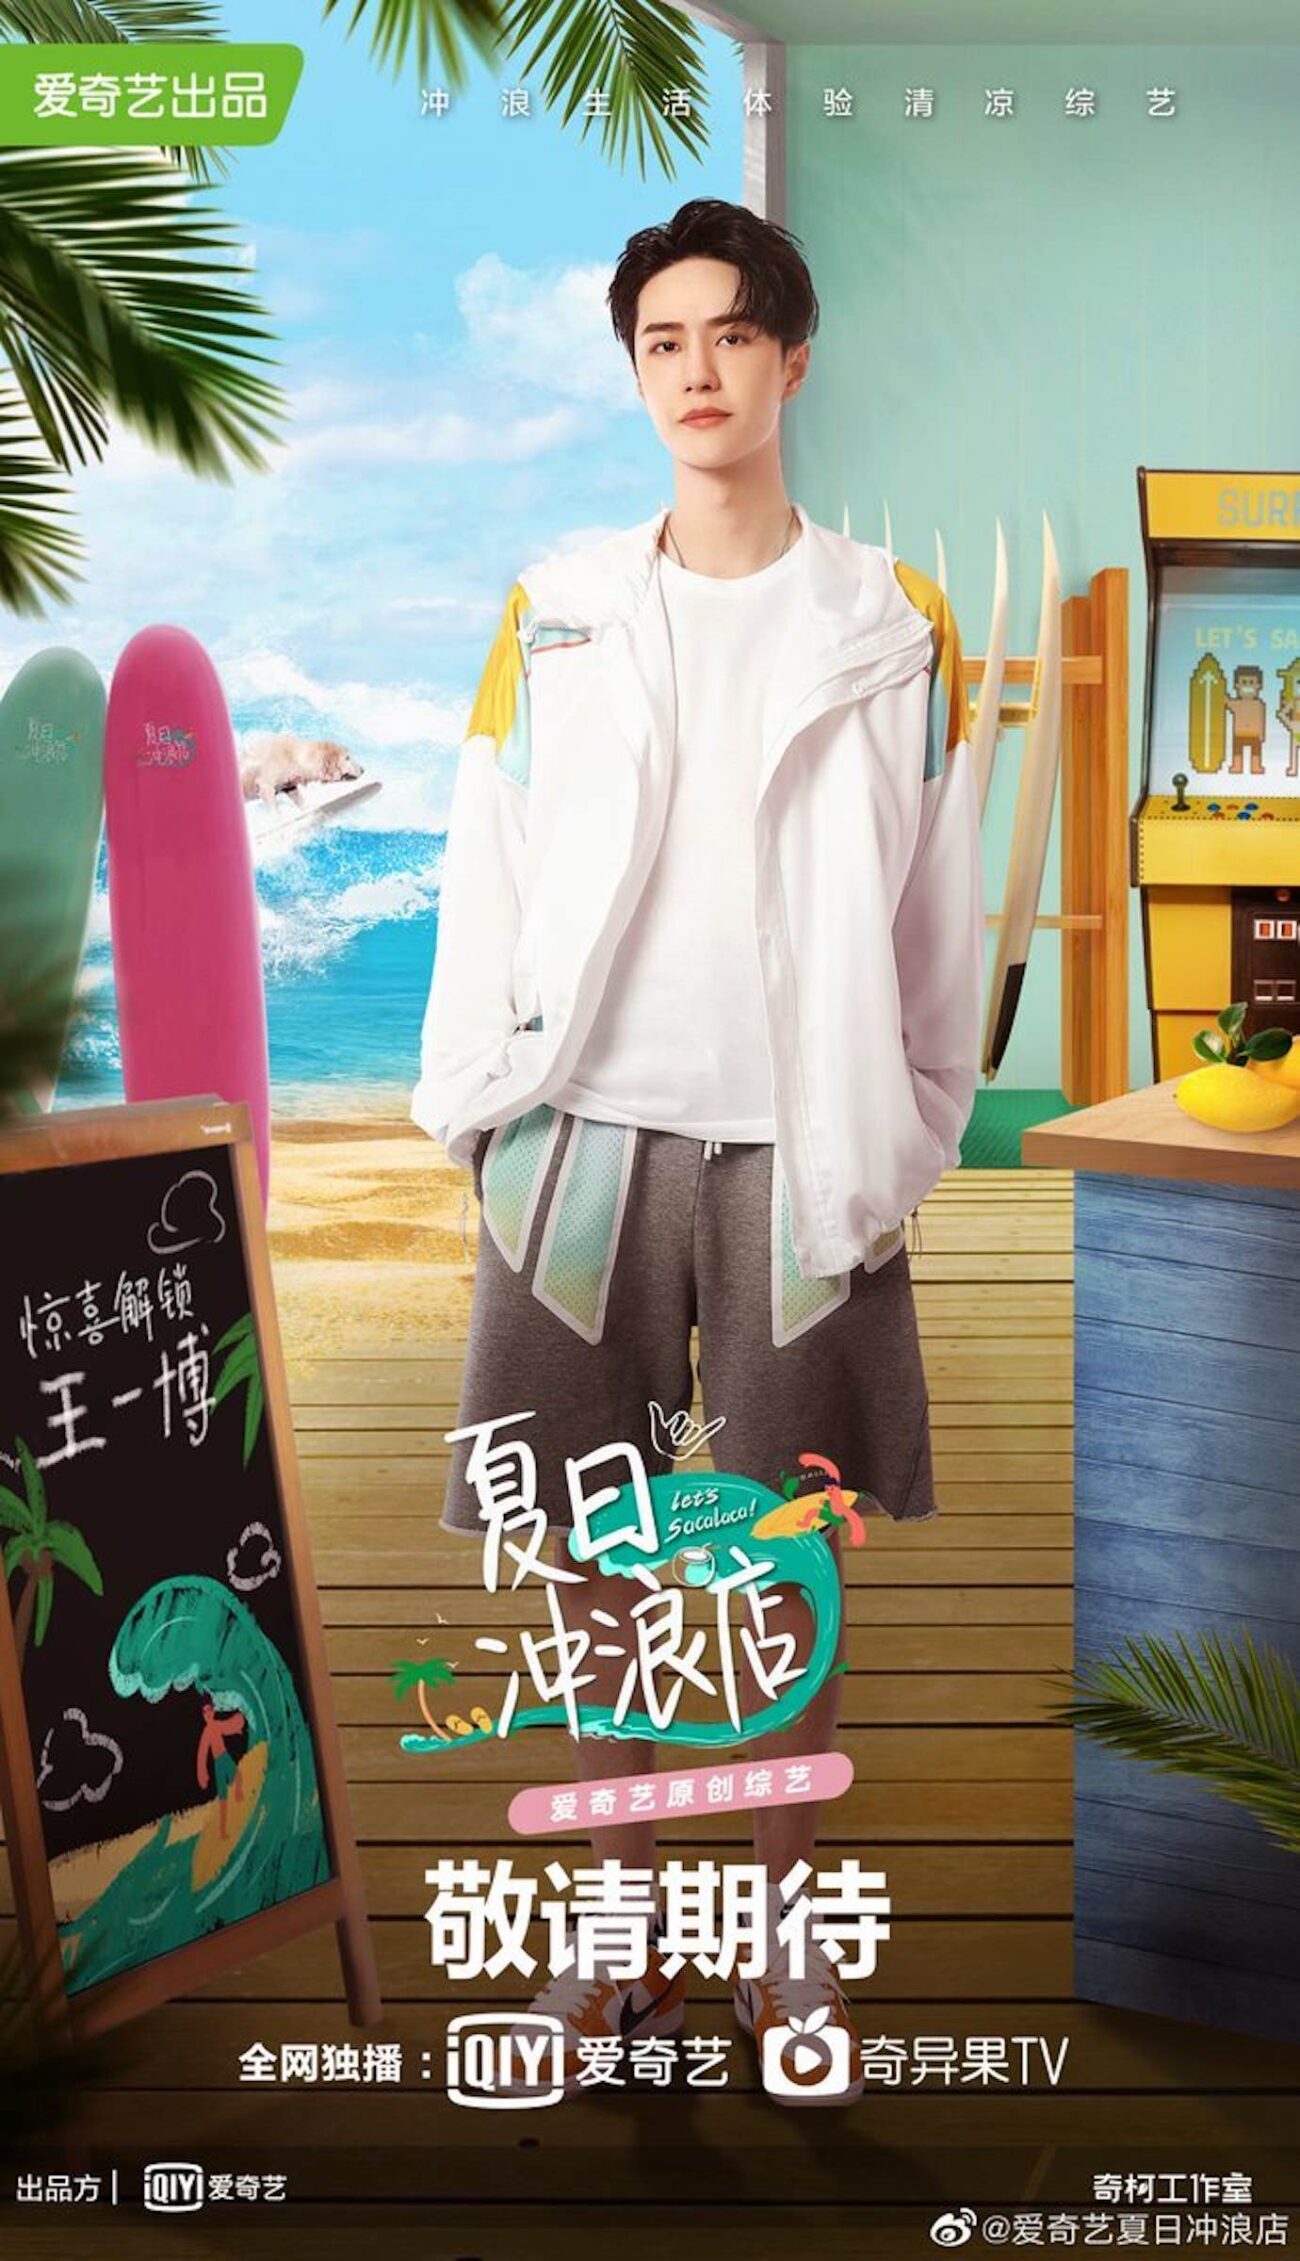 Why you need to watch Wang Yibo on the show ‘Summer Surf Shop’ – Film Daily